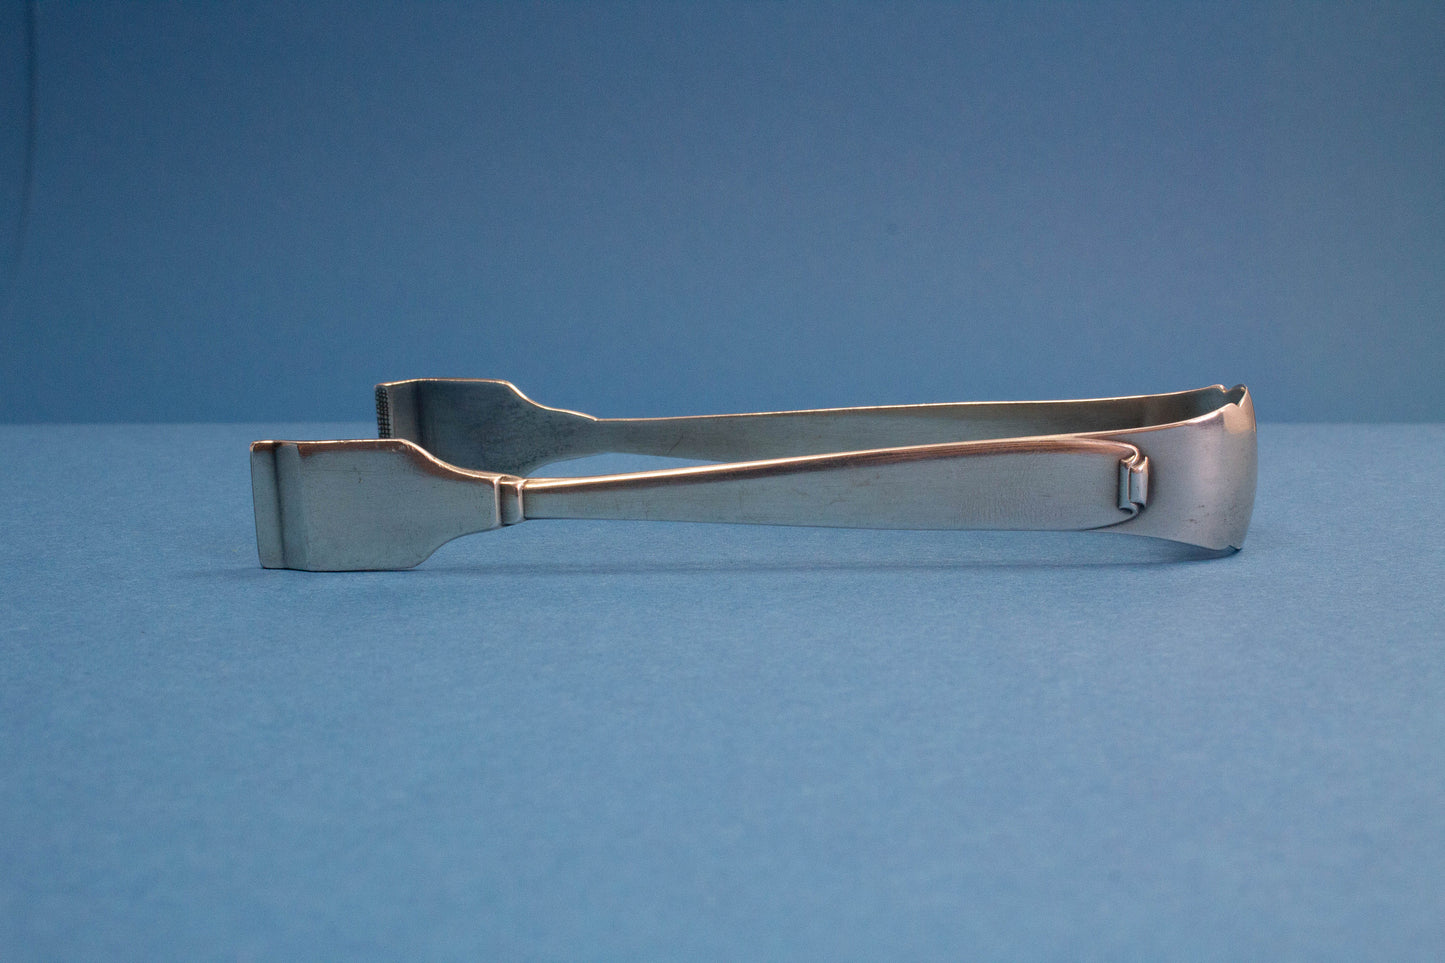 Silver plated sugar tongs with art deco pattern